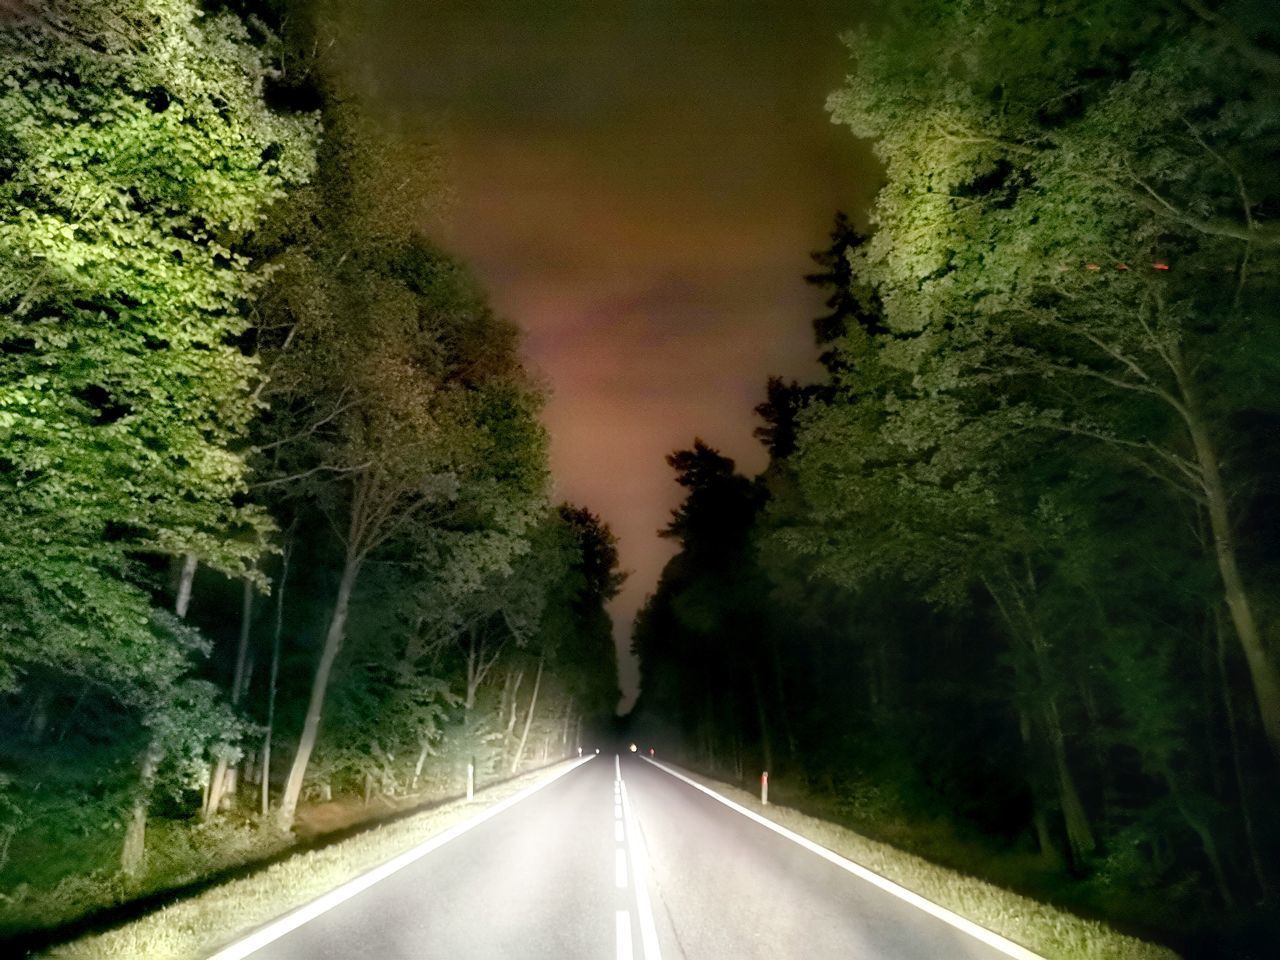 VIEW OF COUNTRY ROAD AMIDST TREES AGAINST SKY